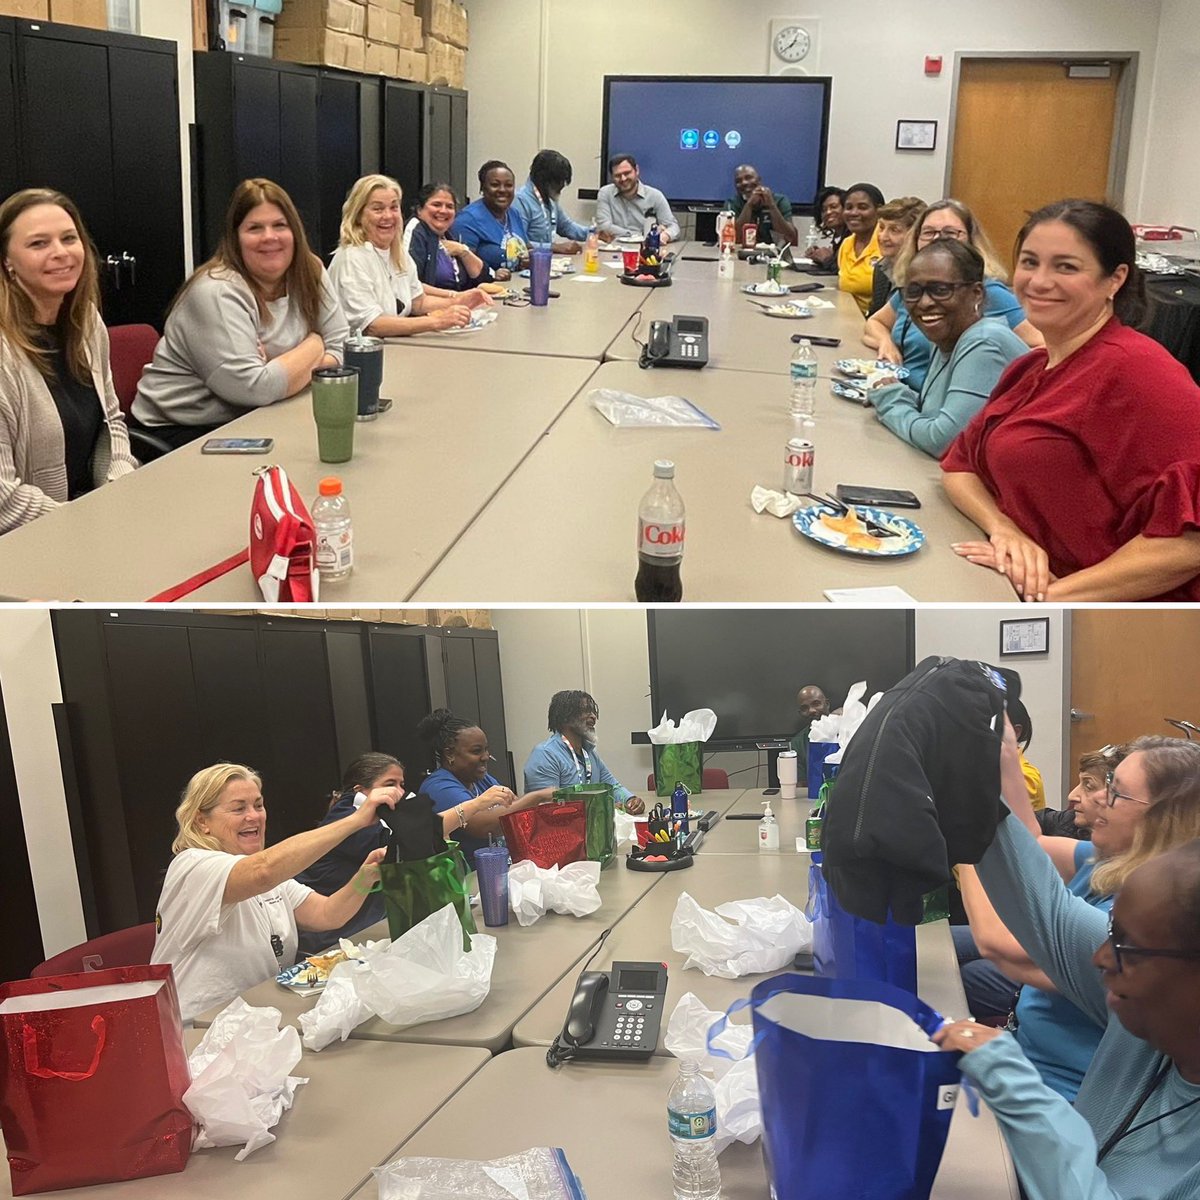 Today we celebrated our CTACE TEAM for everything that they do for our students! Cooking demos, massages, Zumba, delicious food, new threads, and laughter - a fantastic way to show appreciation! Thank you BCPS benefits wellness team for organizing a fantastic day! #BrowardCTE24